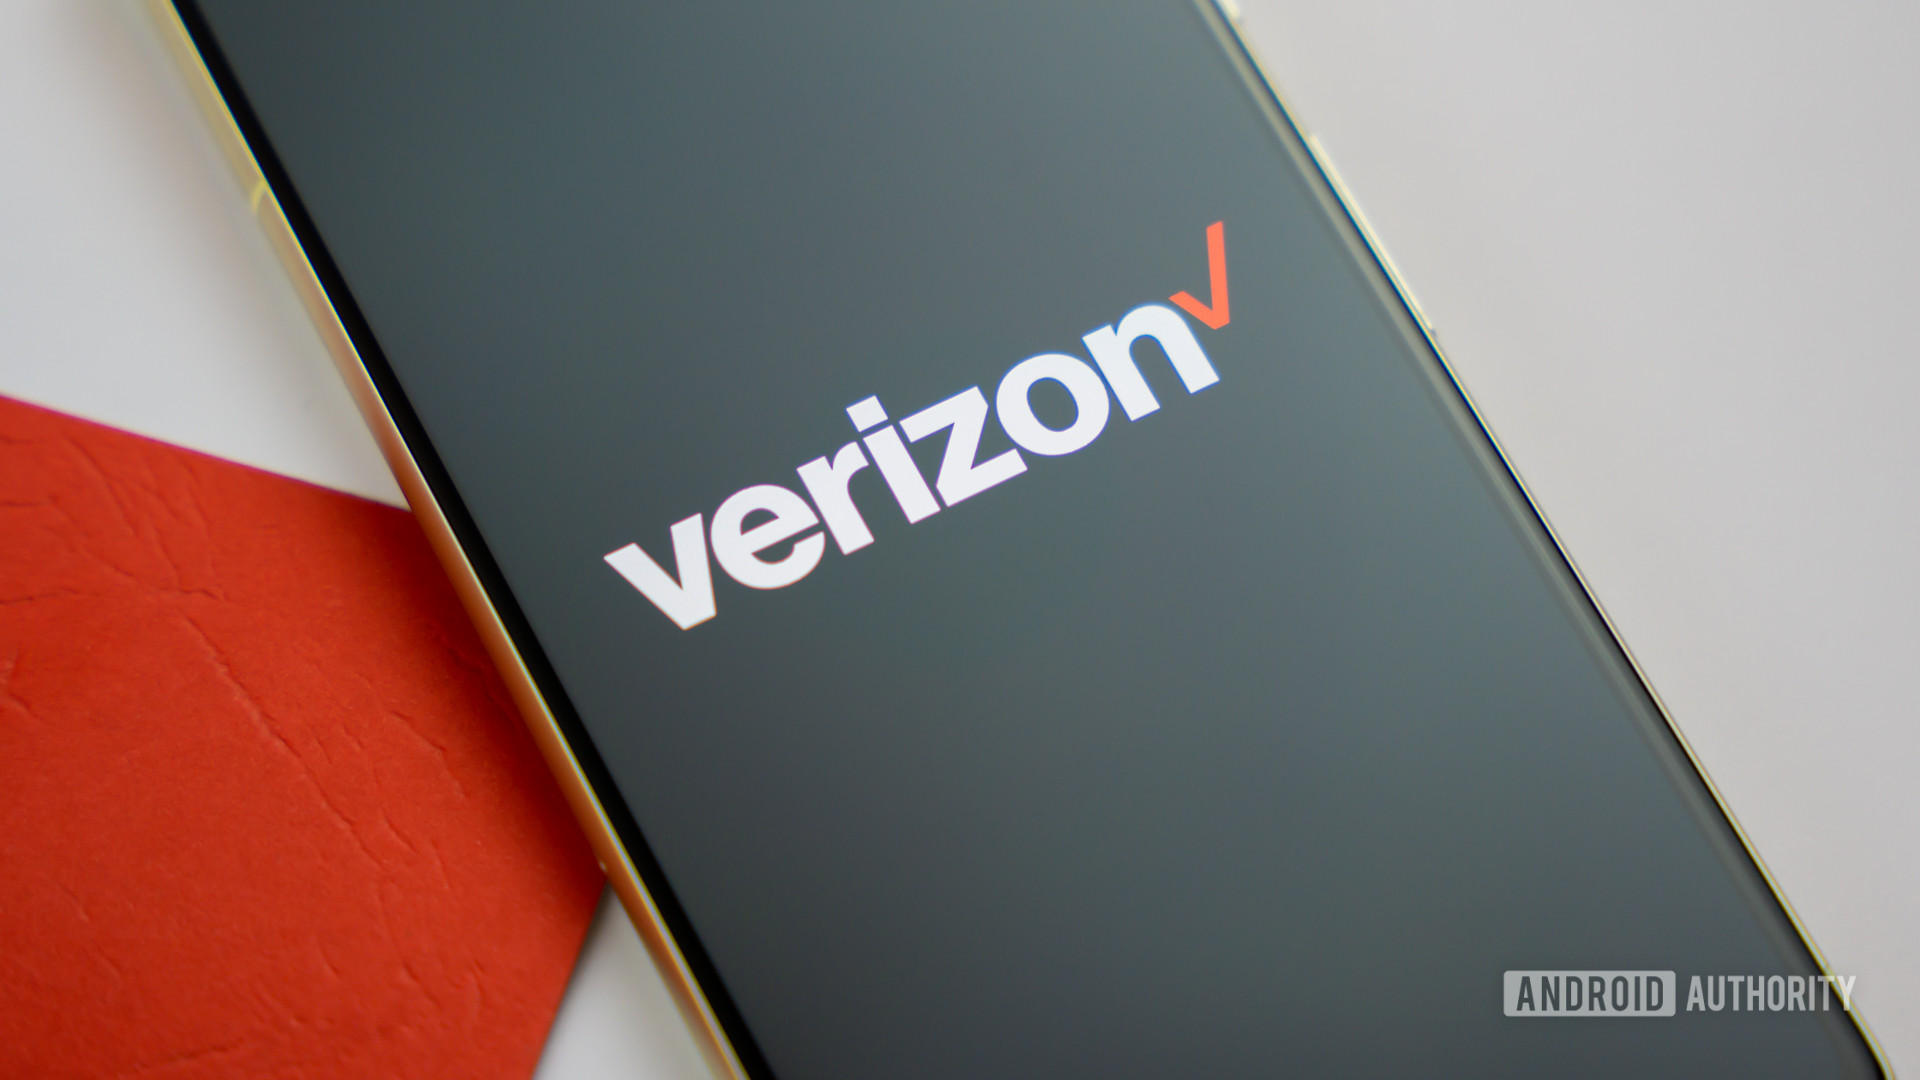 Verizon logo on smartphone with a colored background Stock photo 9